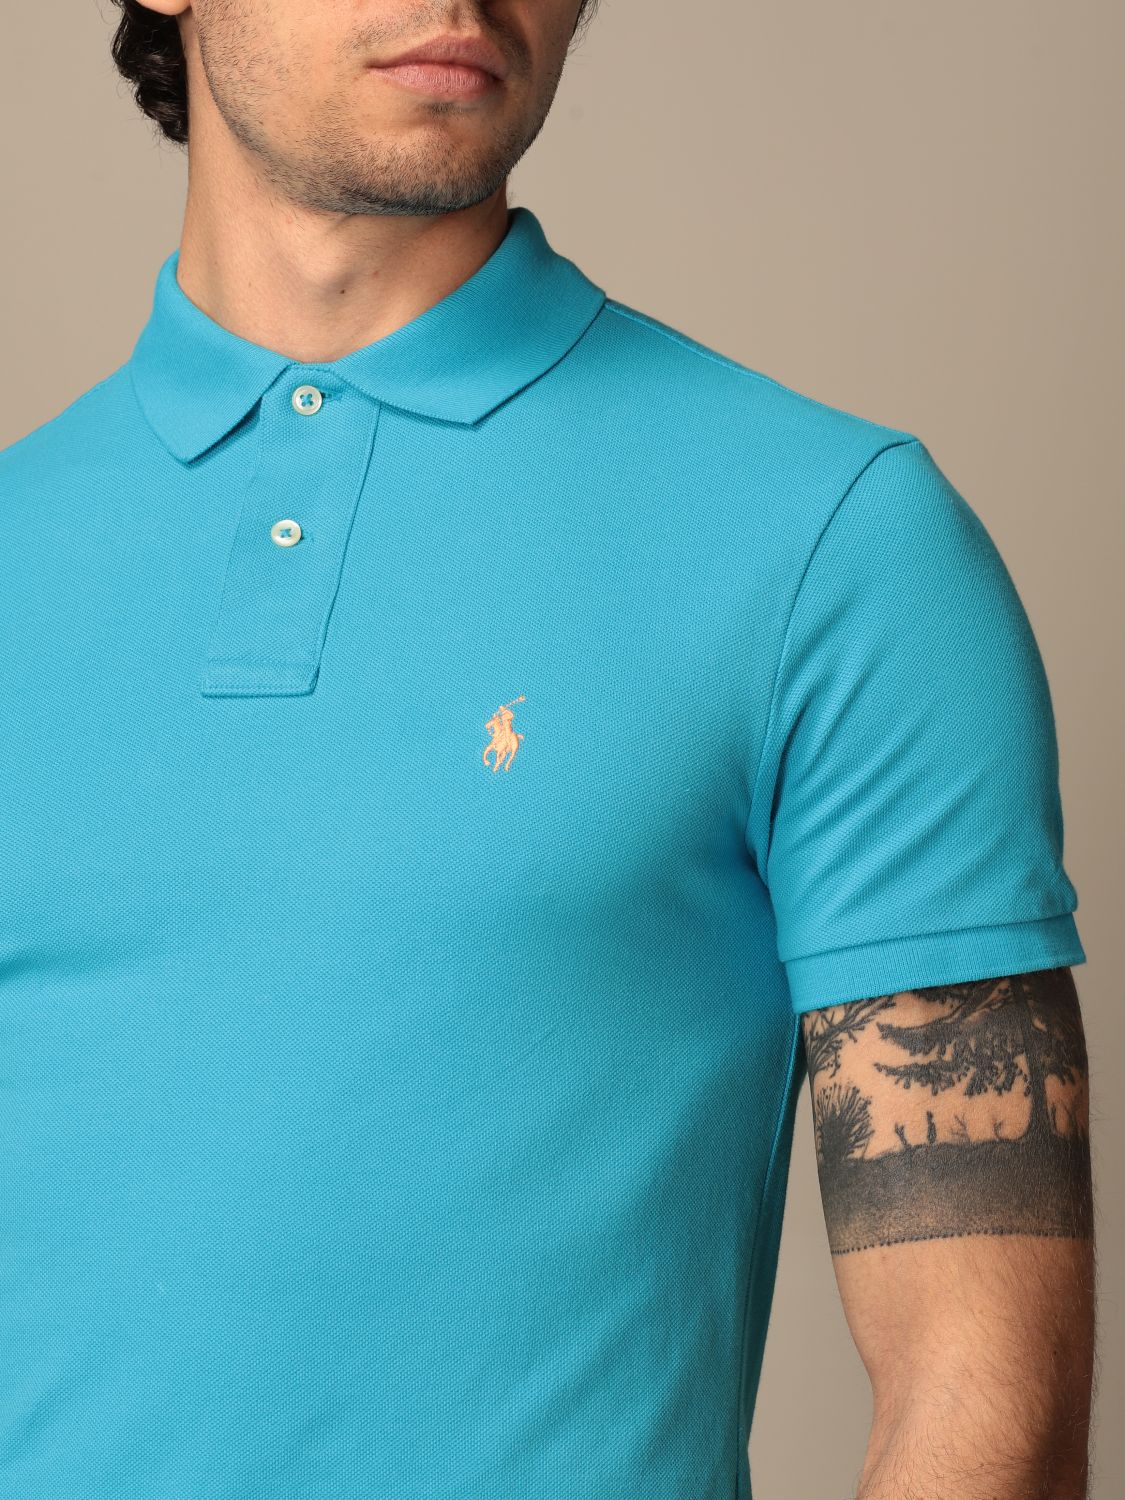 Polo Ralph Lauren Outlet: slim fit cotton polo shirt - Turquoise | Polo ...